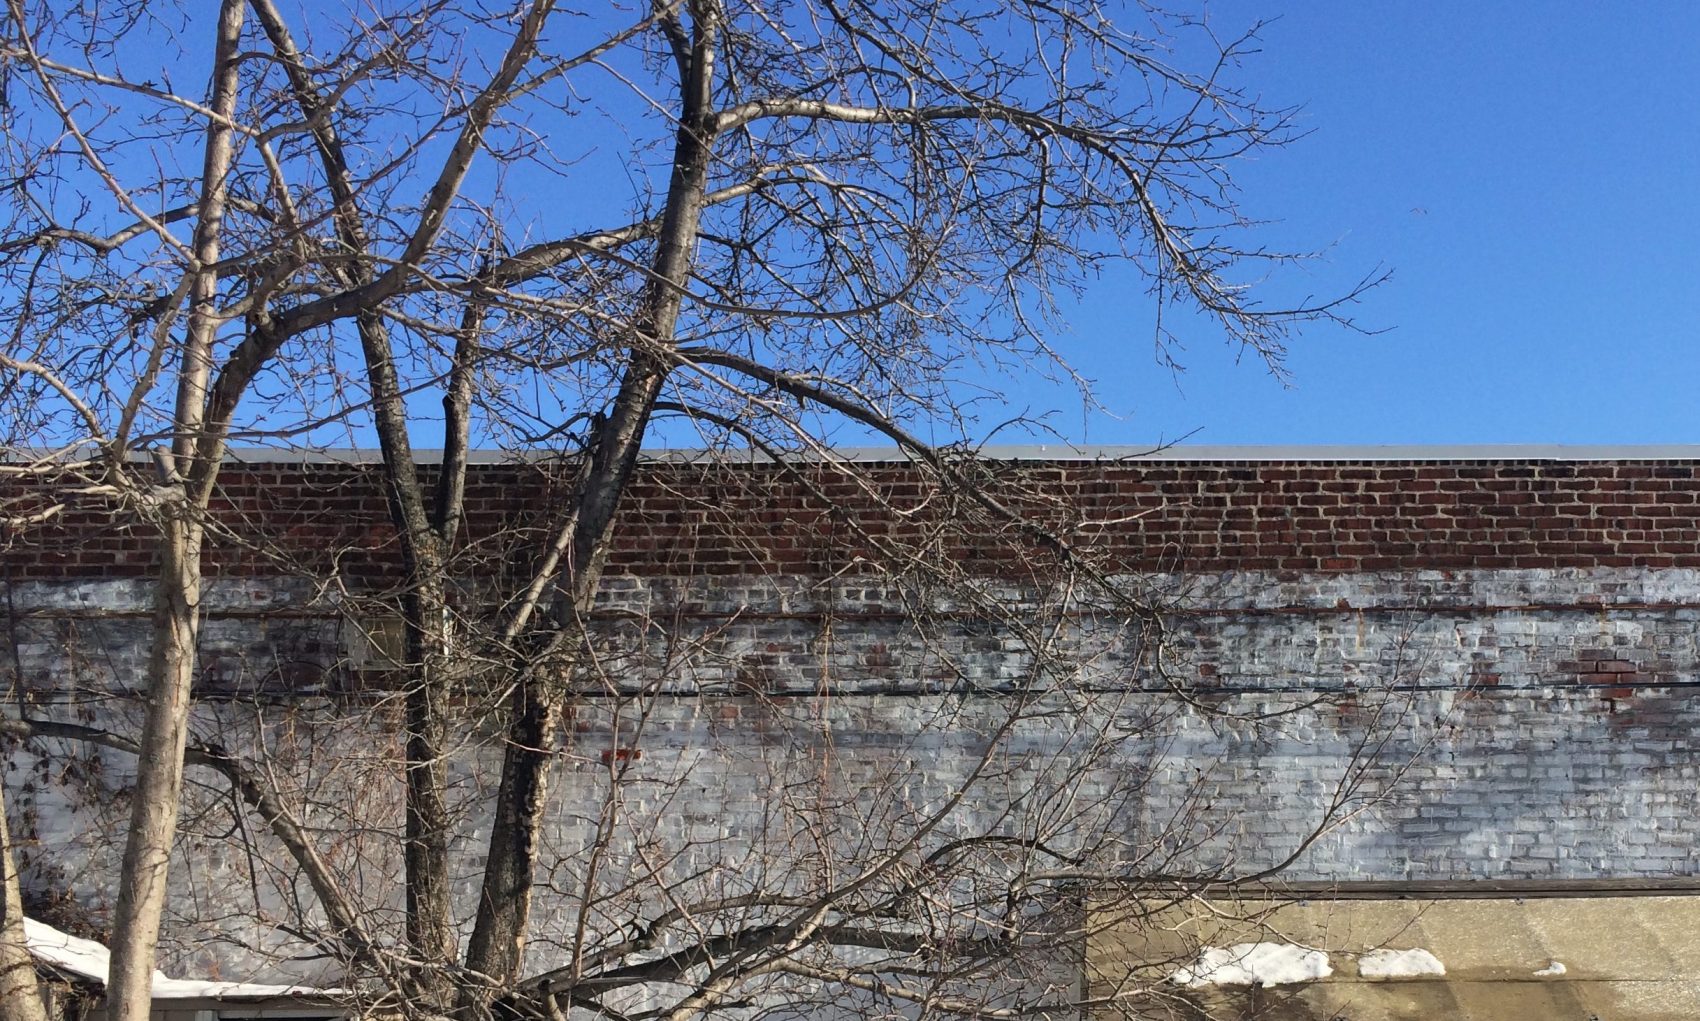 The Philadelphia Orchard Project turns vacant lots into productive orchards